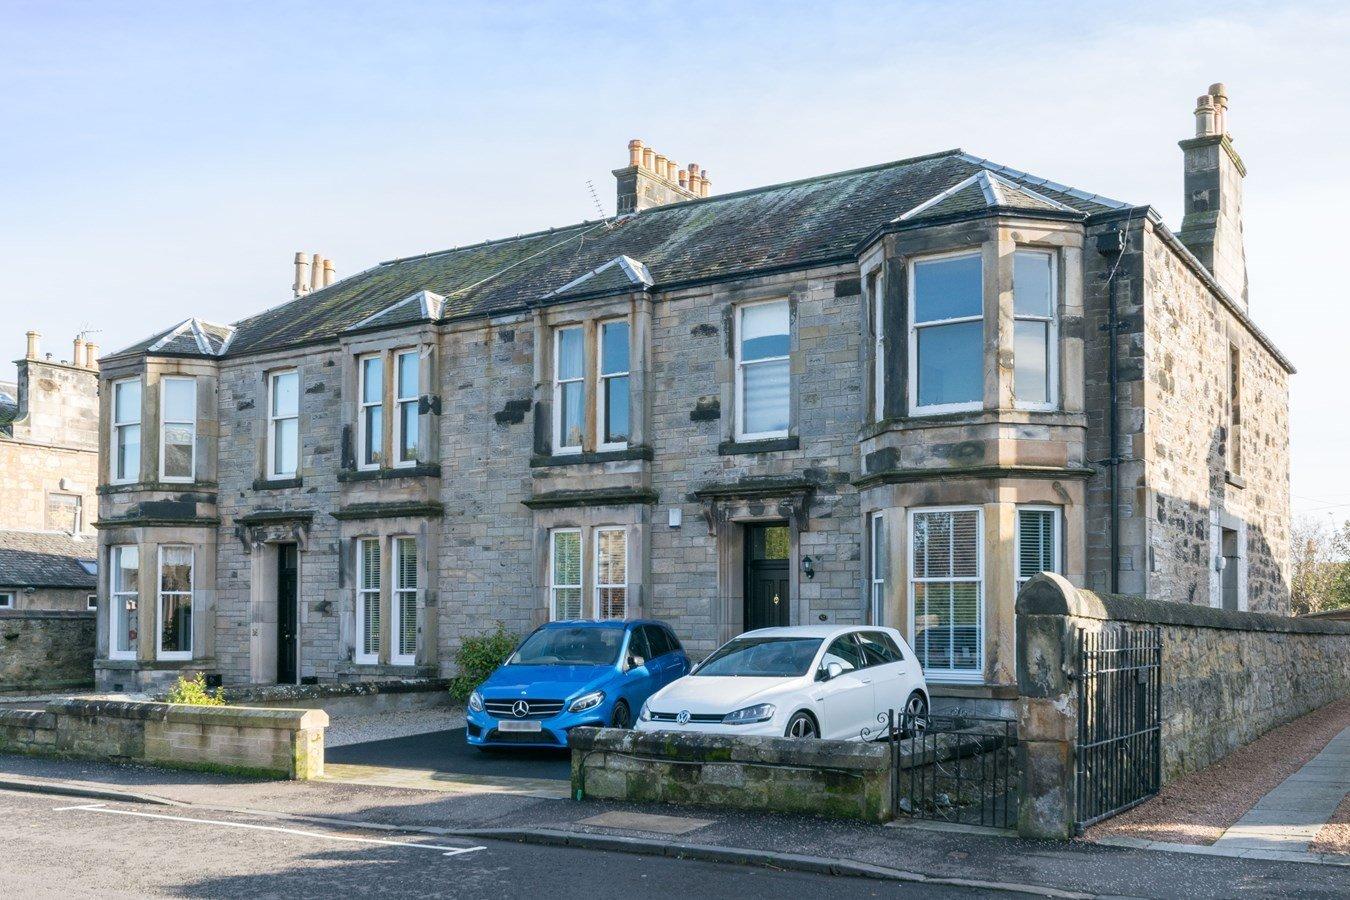 Offers over £210,000. More details at https://www.zoopla.co.uk/for-sale/details/53139086?search_identifier=f7098bd597c50a7eab406325db460d5f